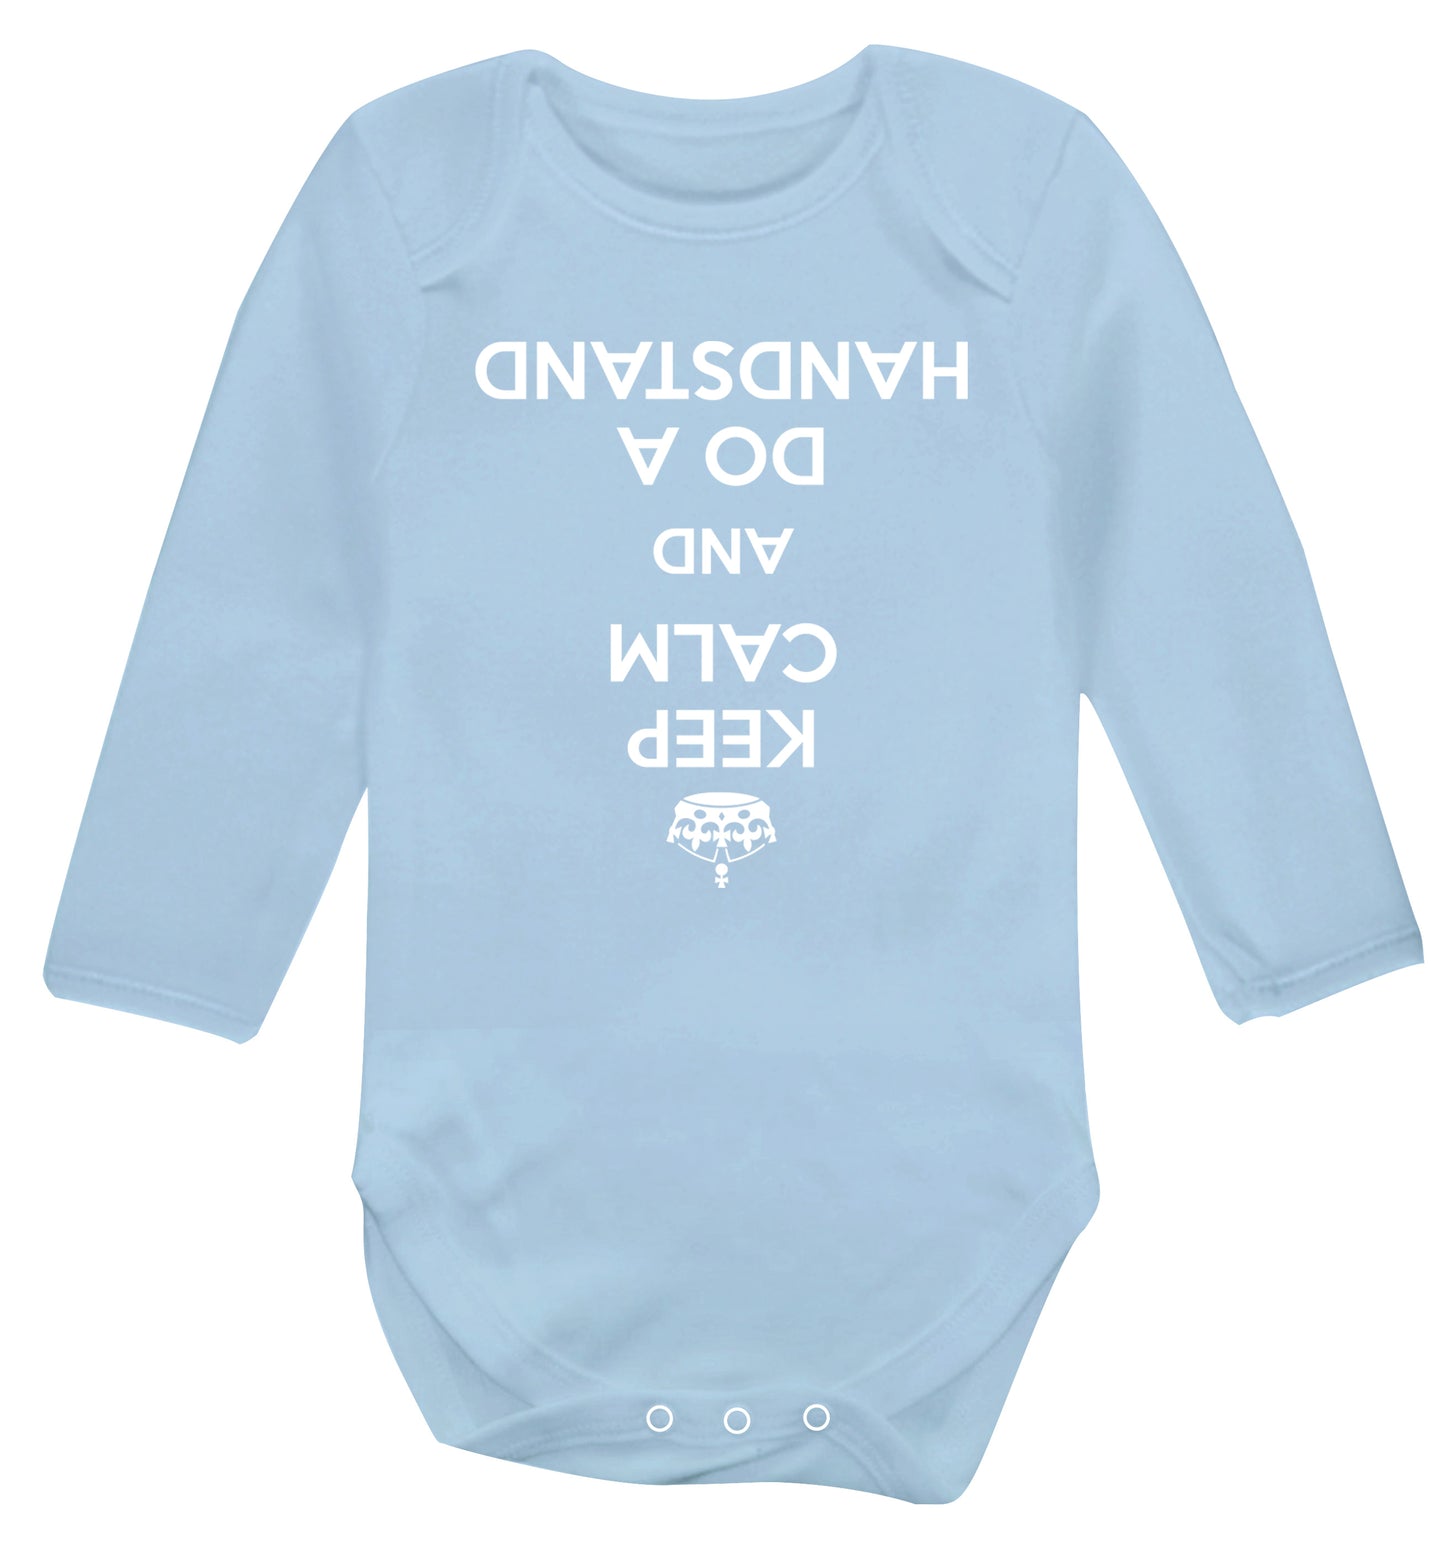 Keep calm and do a handstand Baby Vest long sleeved pale blue 6-12 months